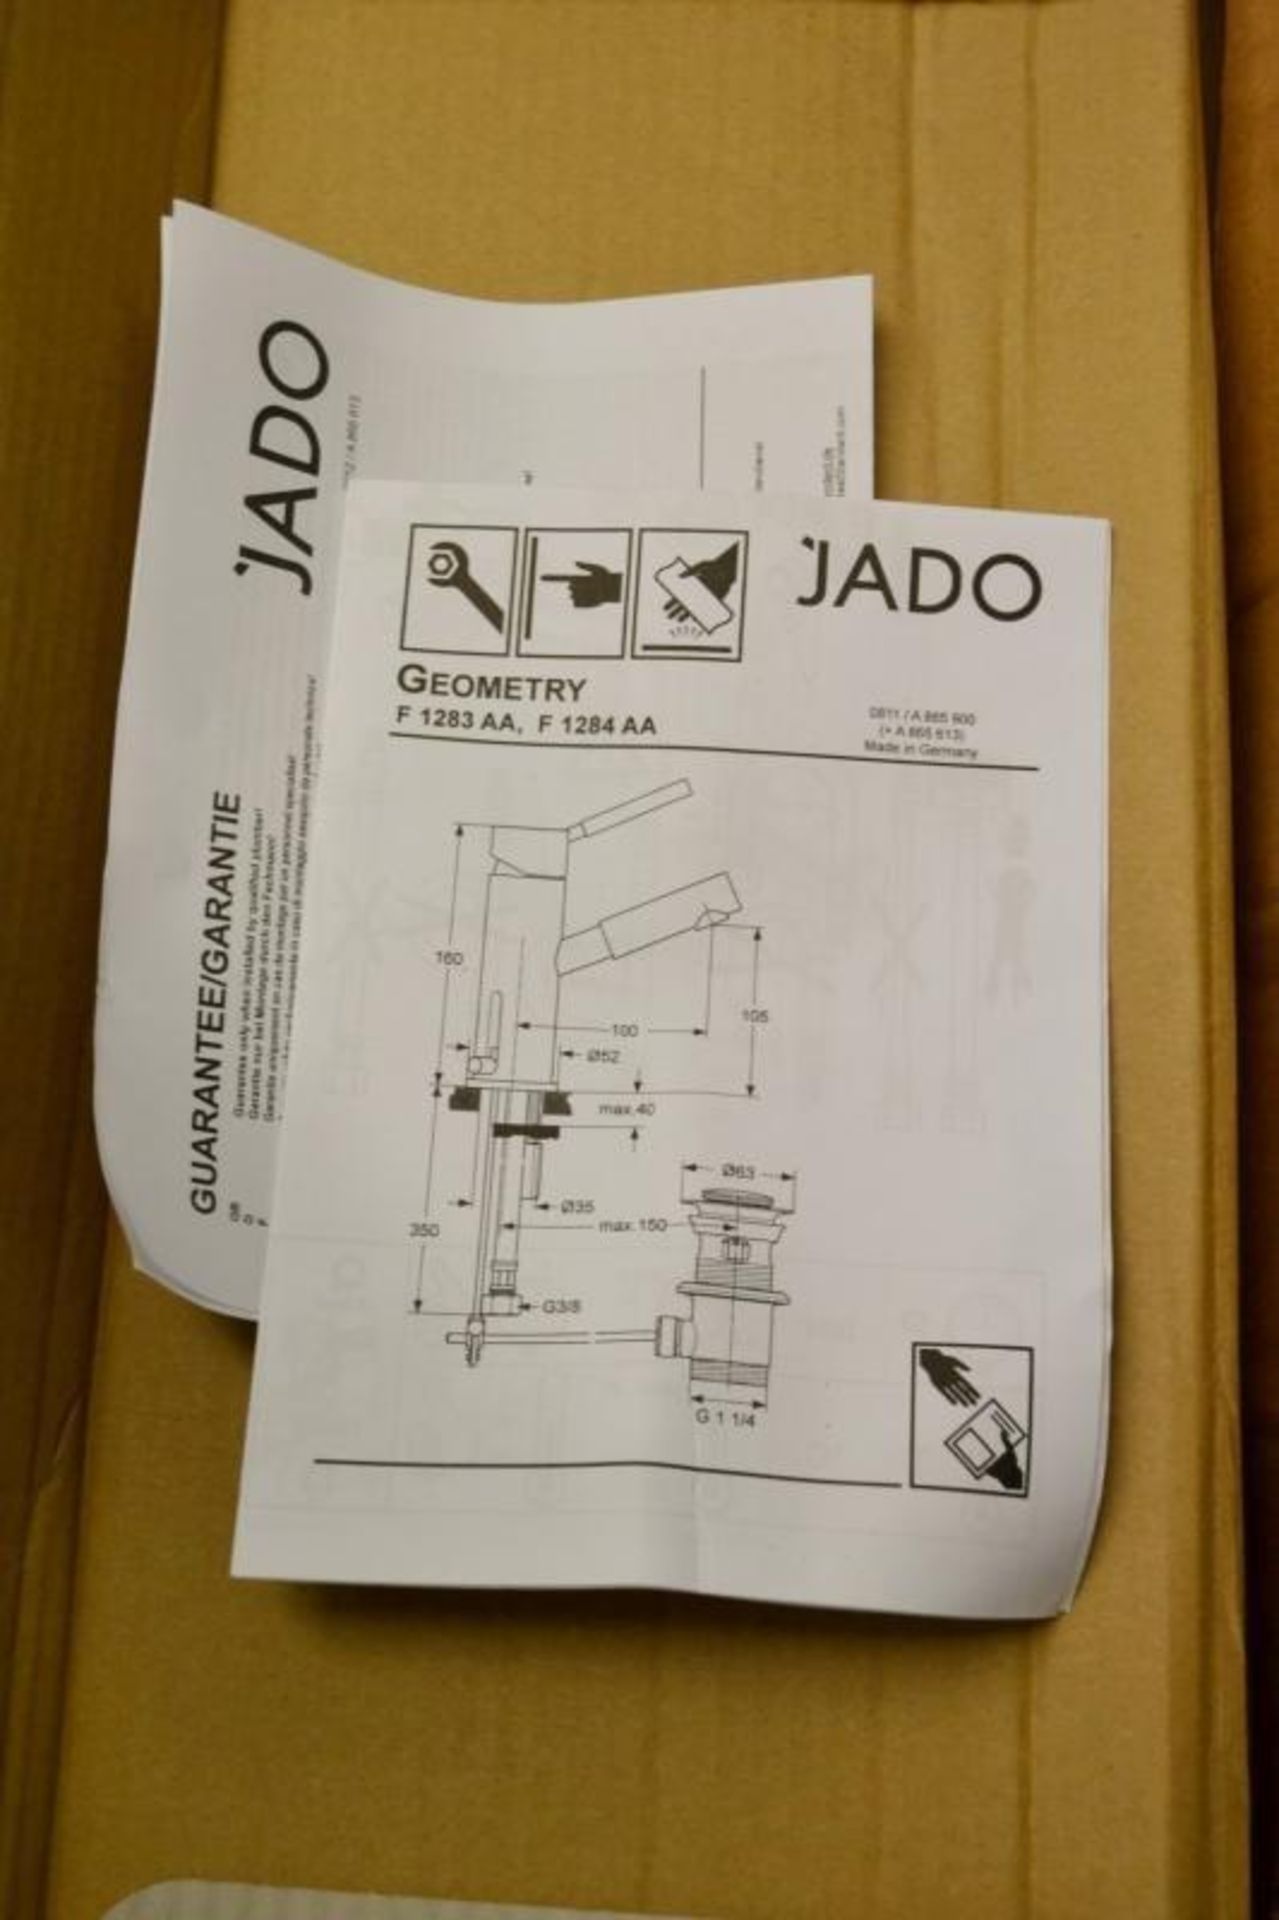 1 x Ideal Standard JADO &quot;Geometry&quot; A1 S/L Basin Mixer Tap With Pop-up Waste (F1283AA) - Pr - Image 2 of 10